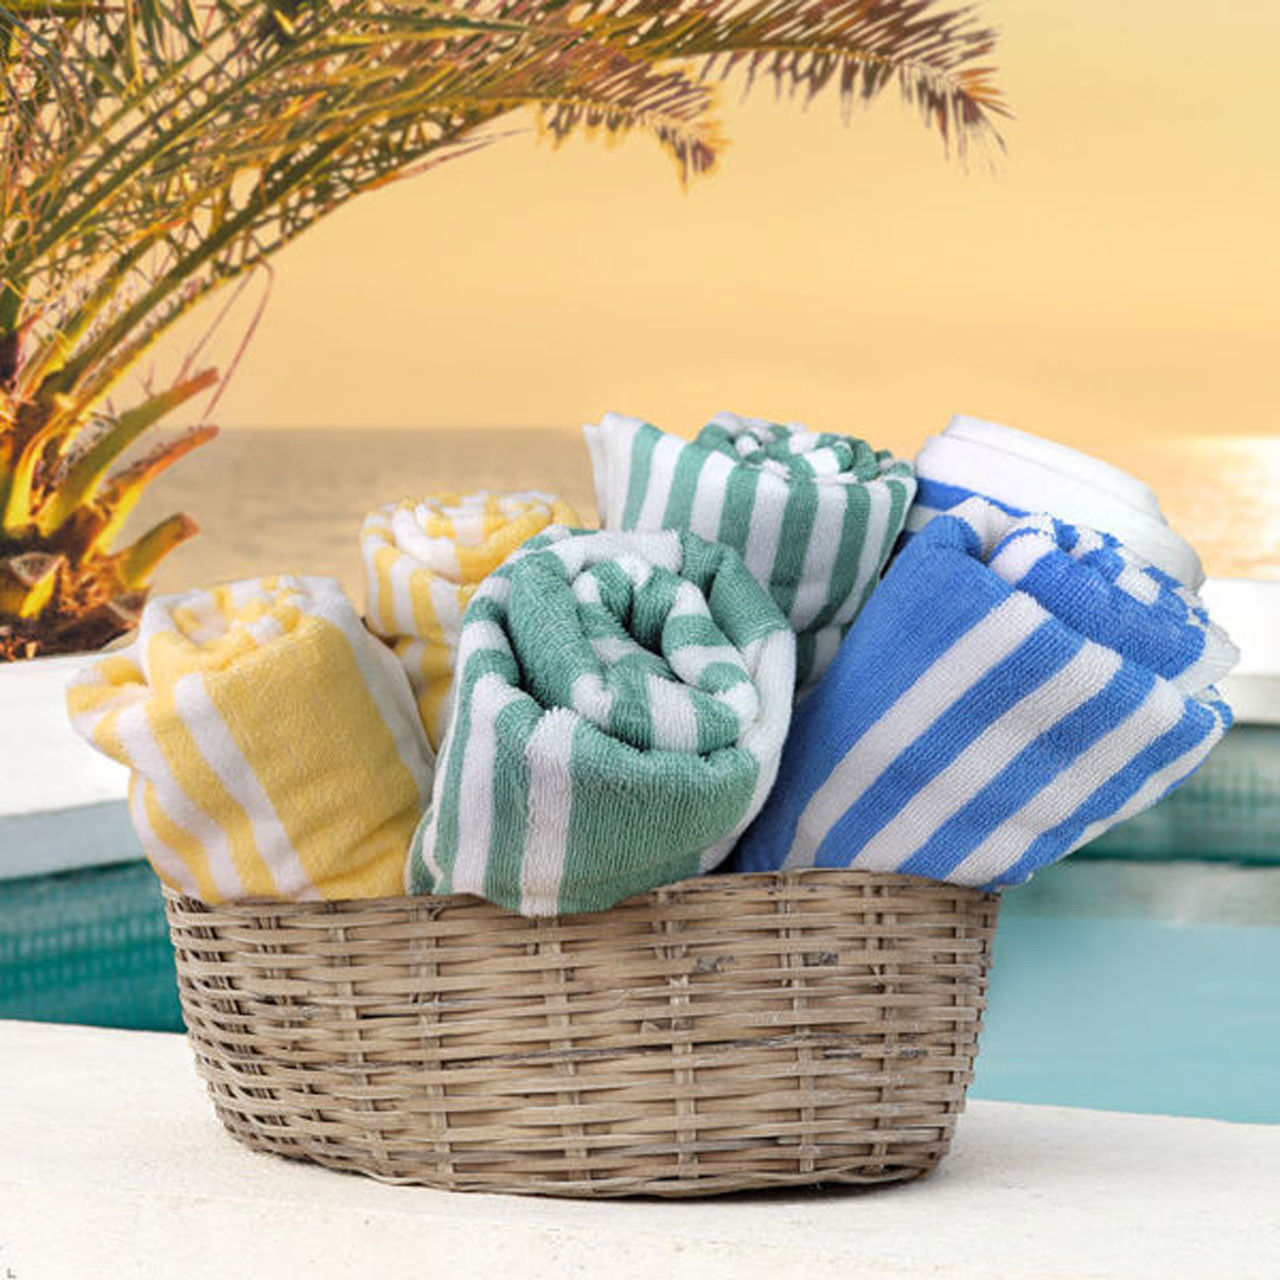 Who are the Playa Cabana Stripe Bulk Beach Towels intended for?